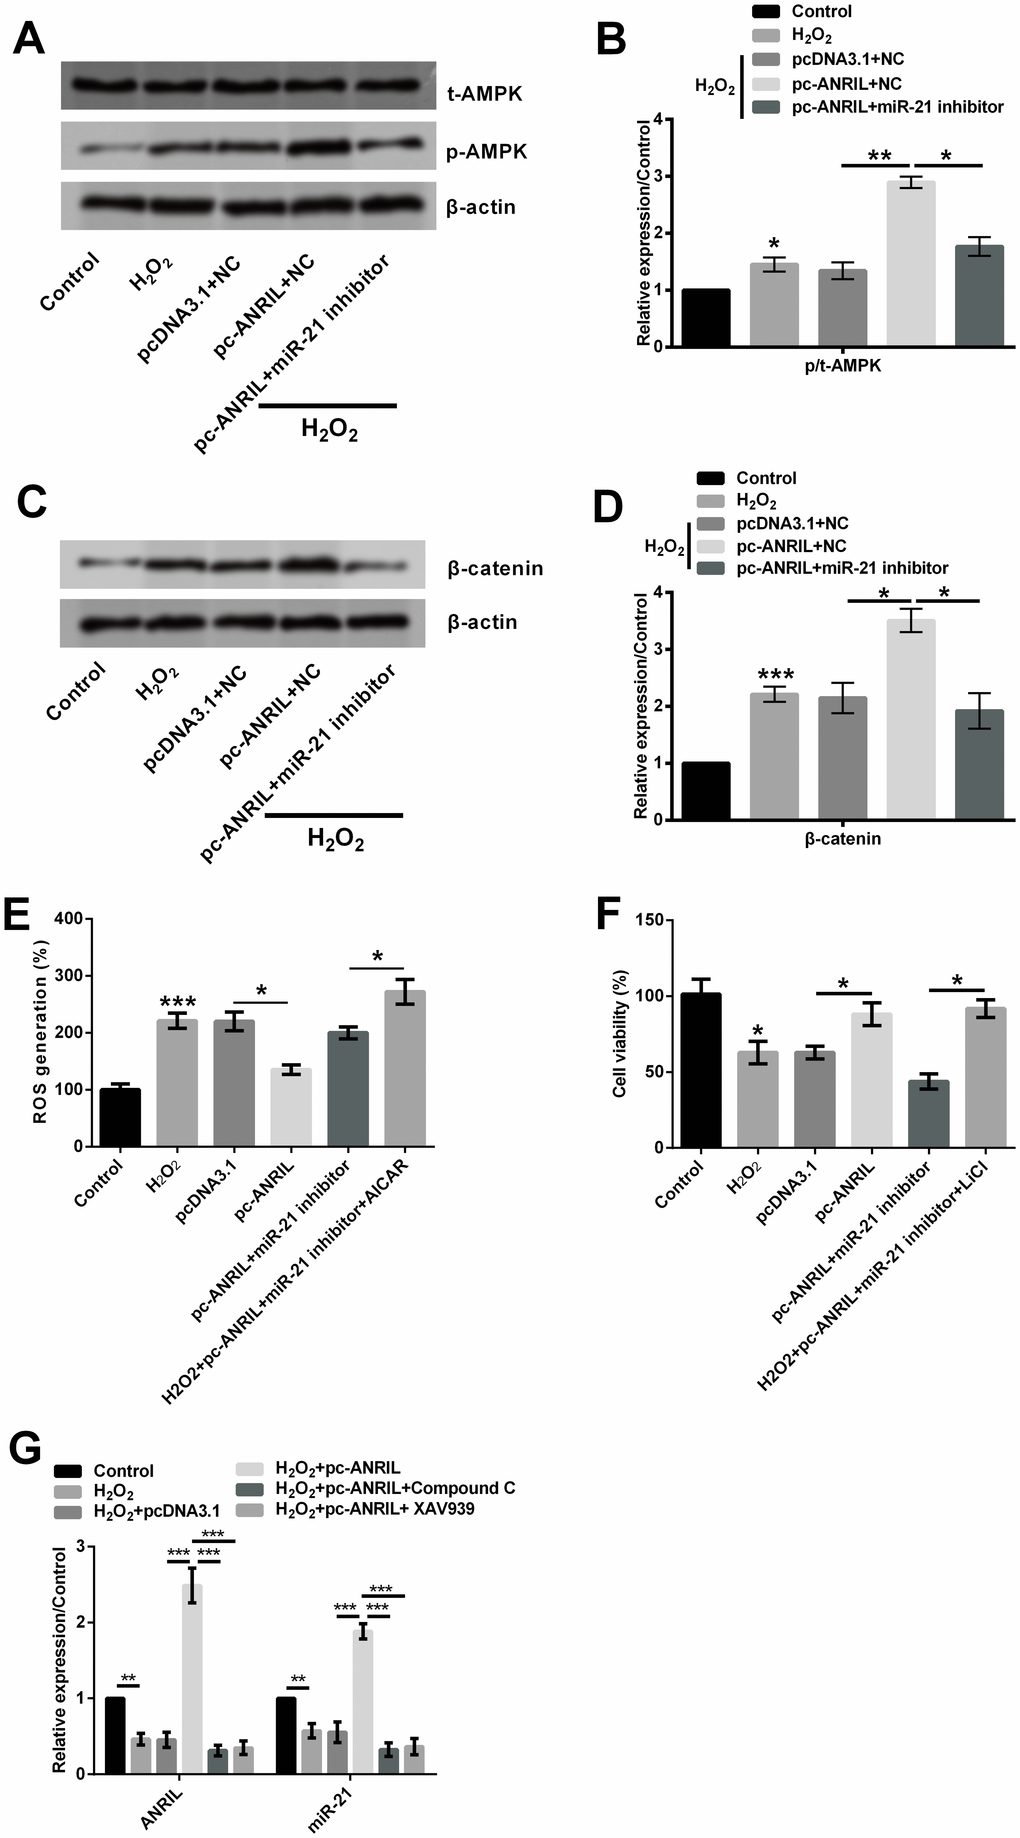 LncRNA ANRIL activated AMPK and β-catenin in H2O2-treated HLECs via up-regulation of miR-21. HLEC SRA01/04 cells co-transfected with pcDNA3.1 (pc-ANRIL) and miR-21 inhibitor (inhibitor-NC) or untransfected cells were treated with 400 μM H2O2 for 1 h, and non-treated cells were acted as control. Phosphorylation of AMPK (A, B) and expression of β-catenin (C, D) were testified by Western blot analysis. (E) ROS production was tested through ROS assay; (F) cell viability was tested by CCK-8. SRA01/04 cells were transfected with pcDNA3.1 or pc-ANRIL and treated with Compound C or XAV939, and untreated cells were acted as control. (G) Expression of lncRNA ANRIL and miR-21 were determined by RT-qPCR. Data are shown as the mean ± SD of three independent experiments. *, P P P 